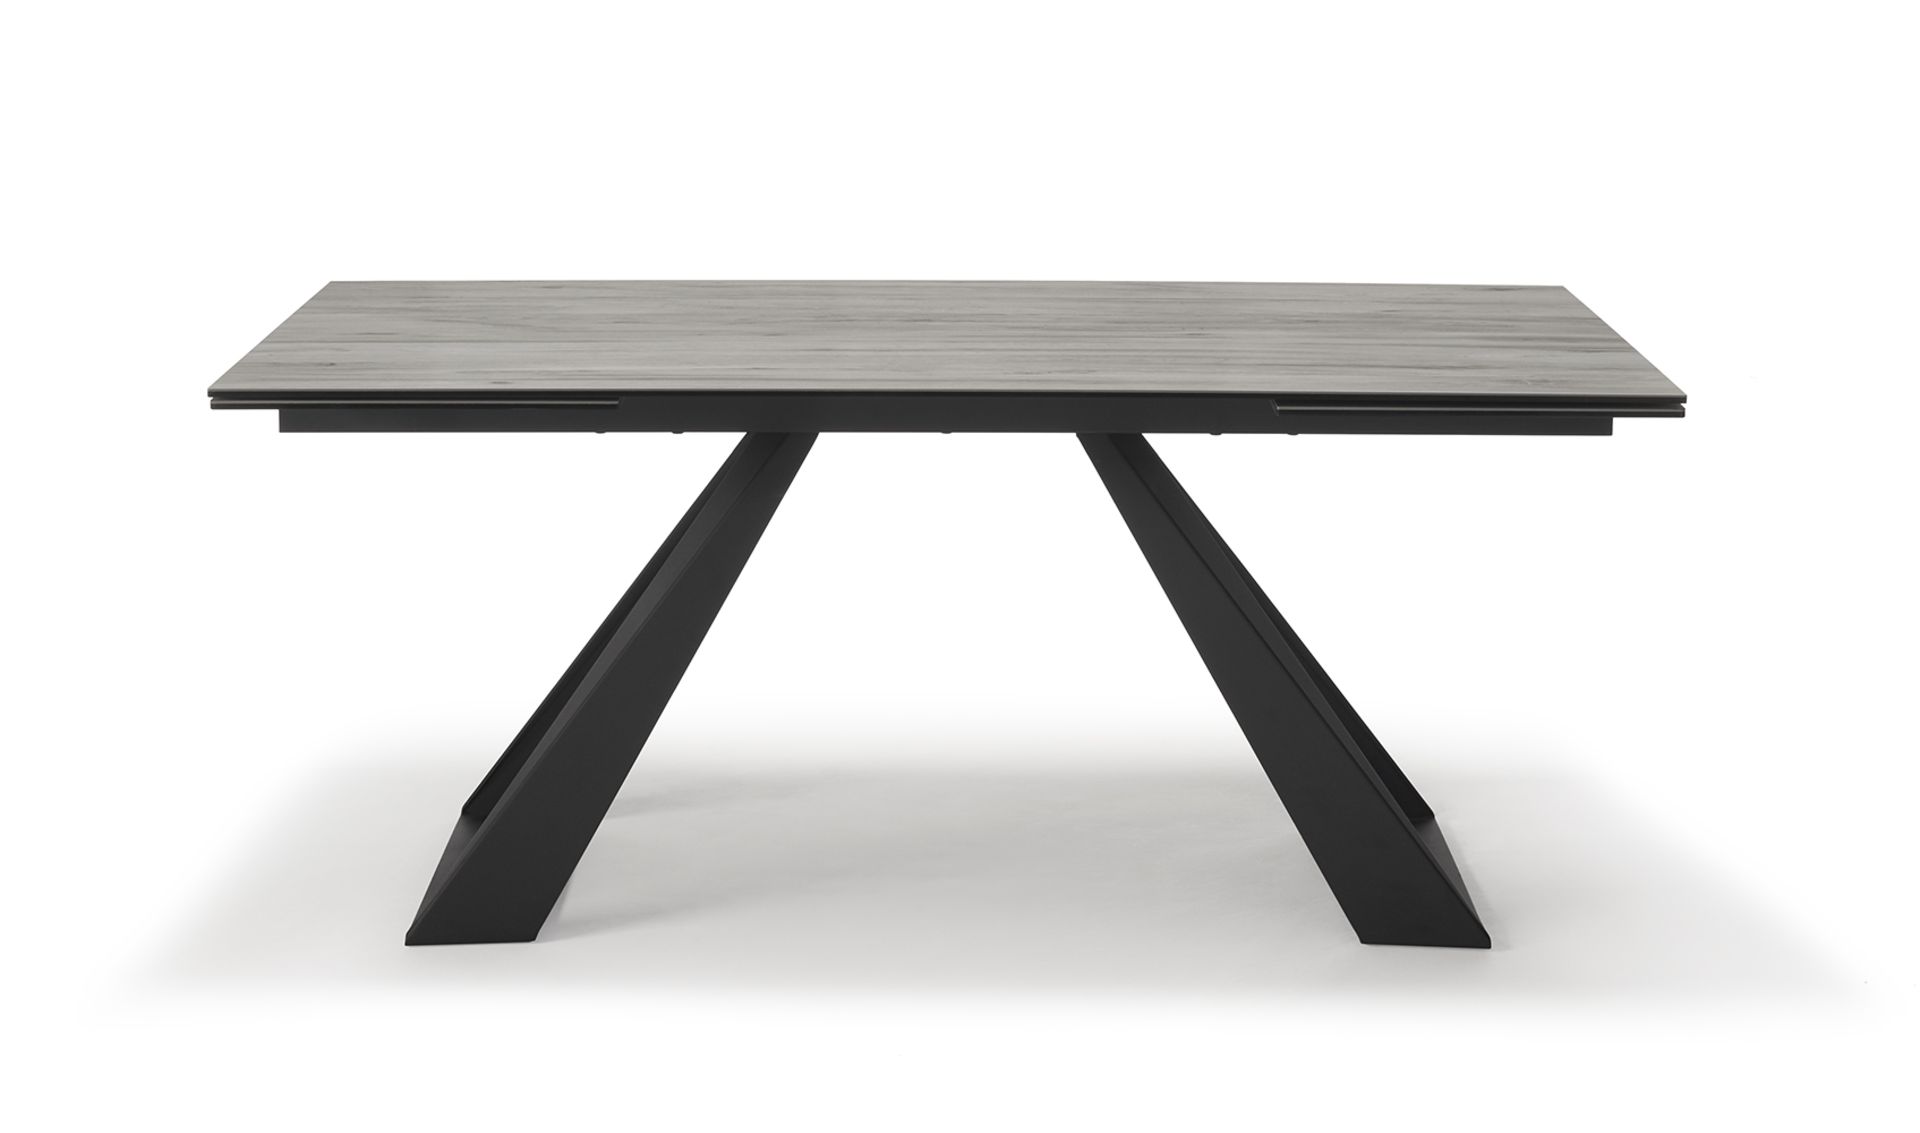 Spartan Dining Table by Kesterport The Spartan Dining Table is part of a sophisticated collection of - Image 3 of 4